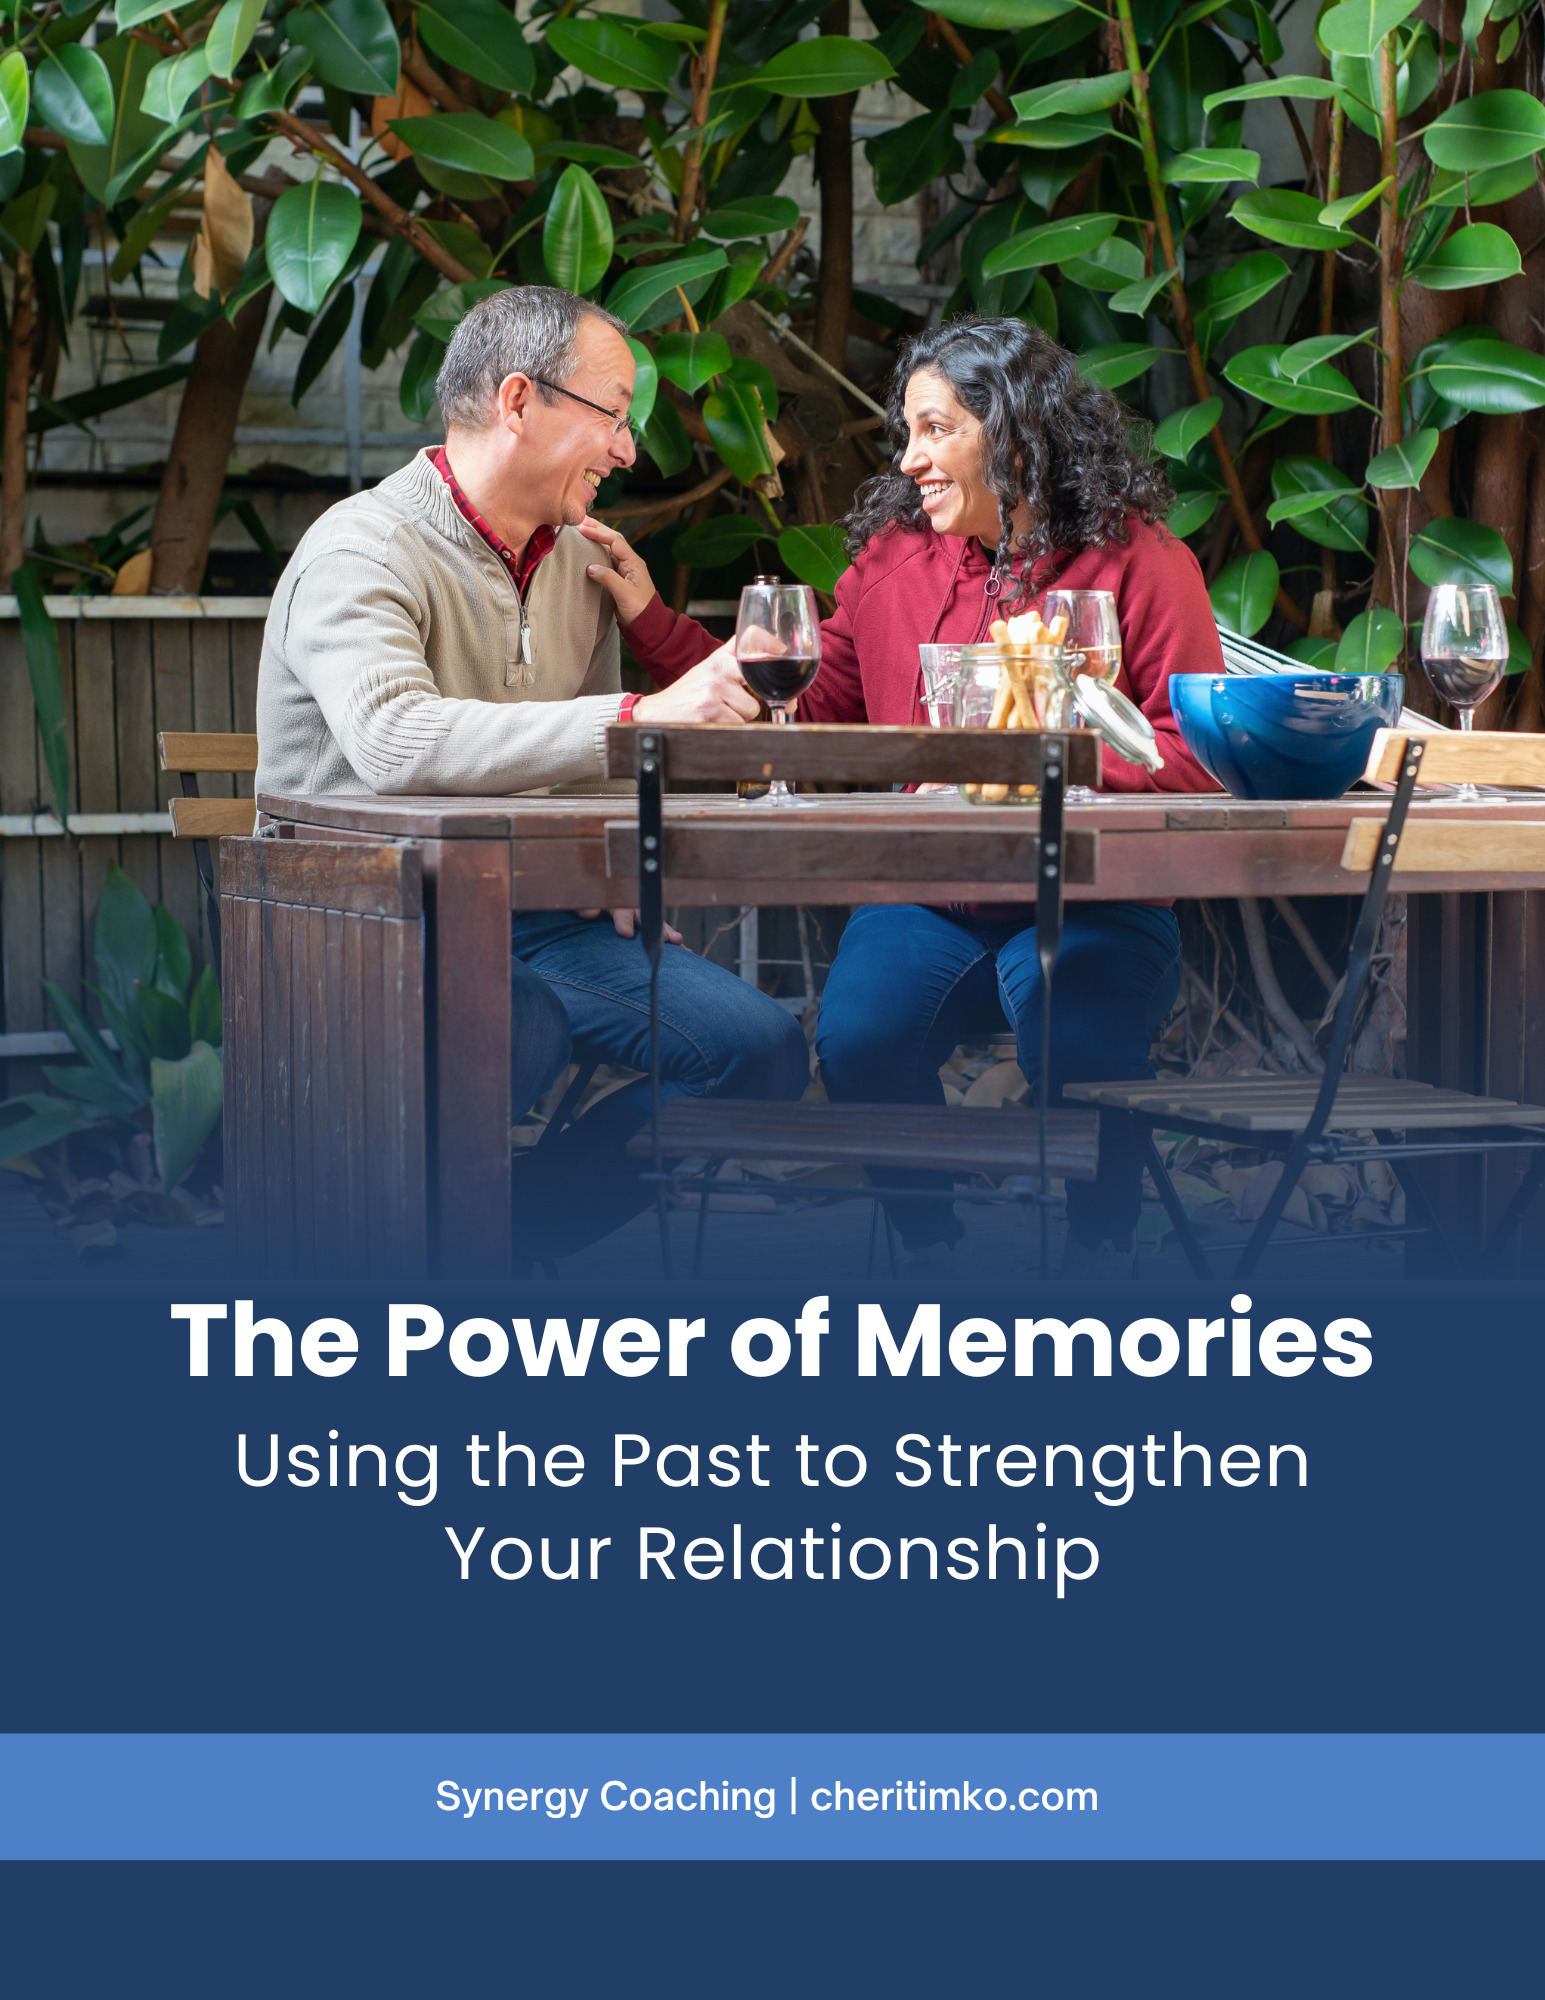 Strengthen Your Relationship Through Fond Memories - Discover "The Power of Memories" by Cheri Timko